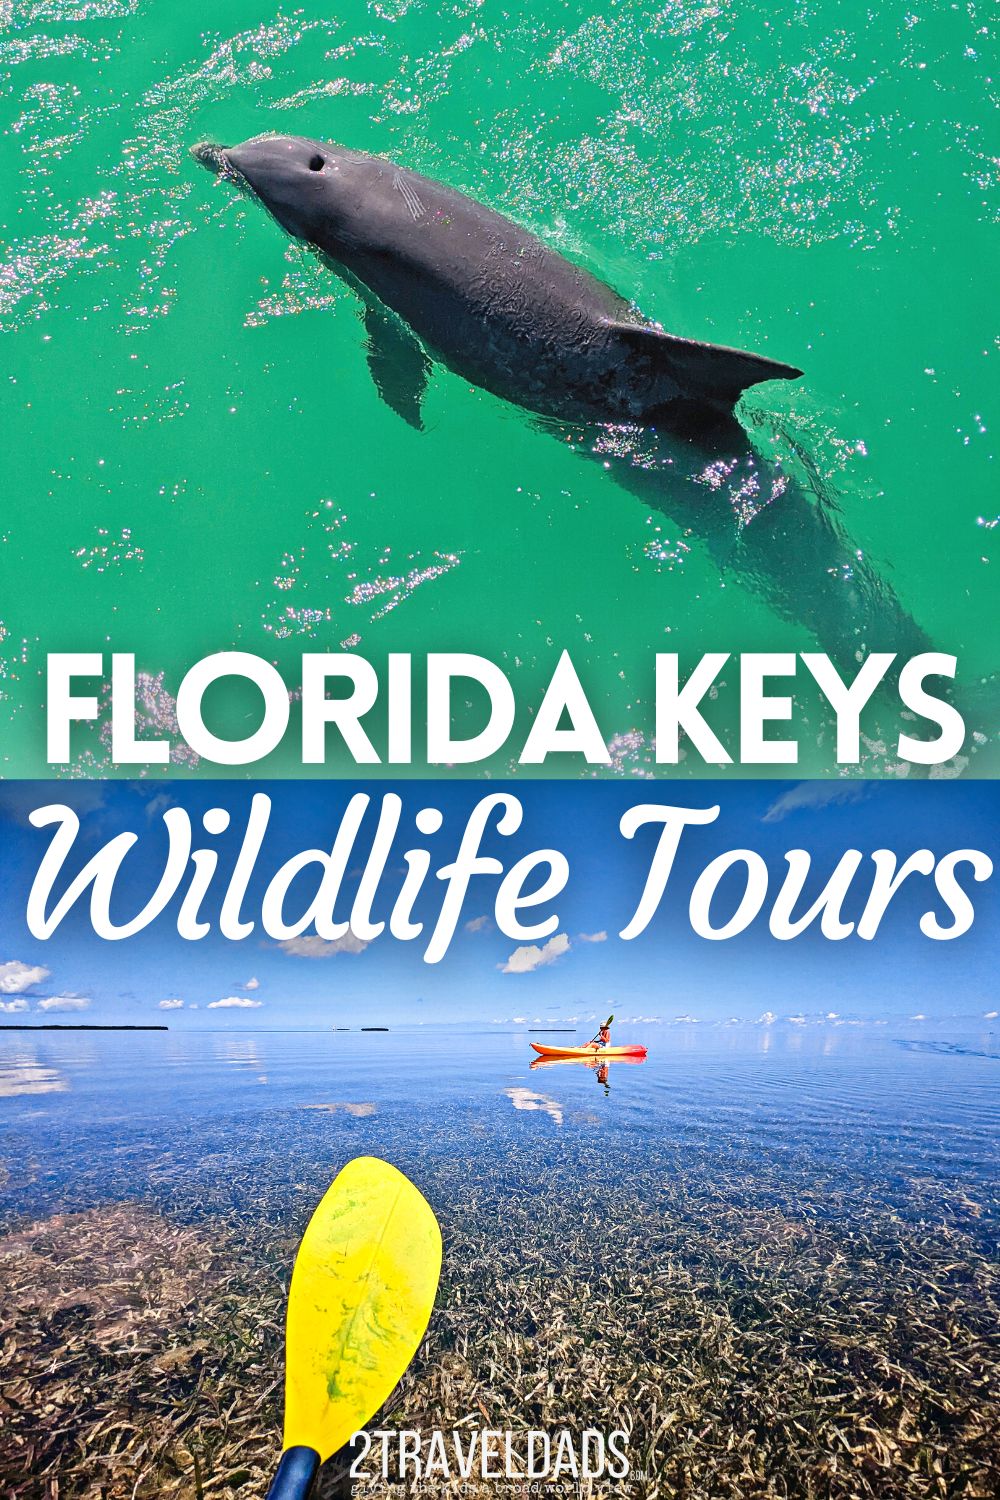 There are lots of great wildlife tours in the Florida Keys, for everything from seeing dolphins to diving at beautiful reefs. We've picked our favorite wildlife tours including kayaking, sailing and catamarans to help visitors plan great experiences.